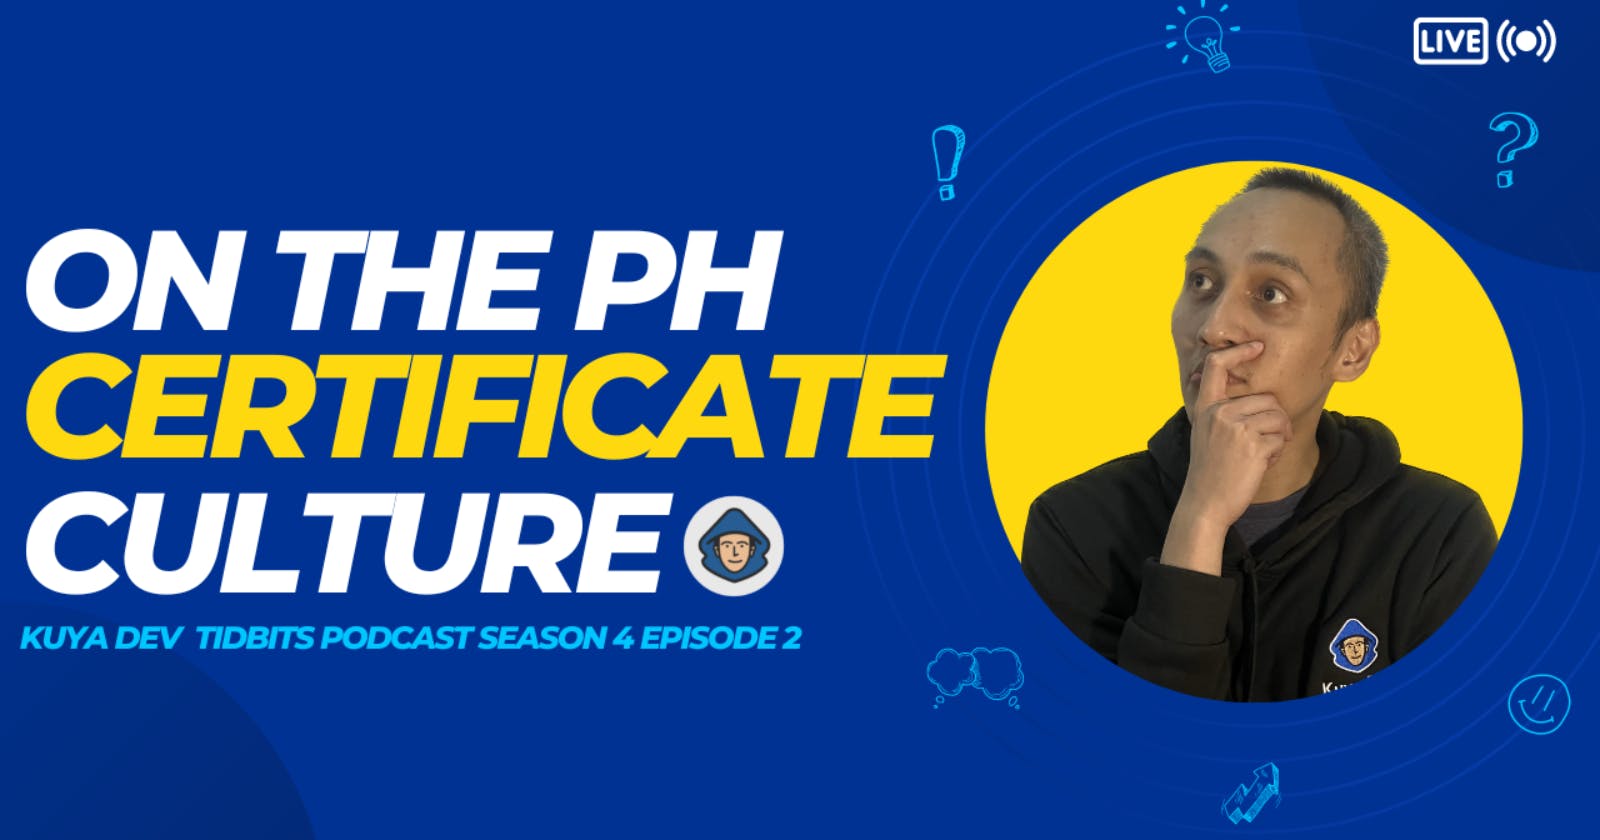 On the Philippine Tech Certificate Culture